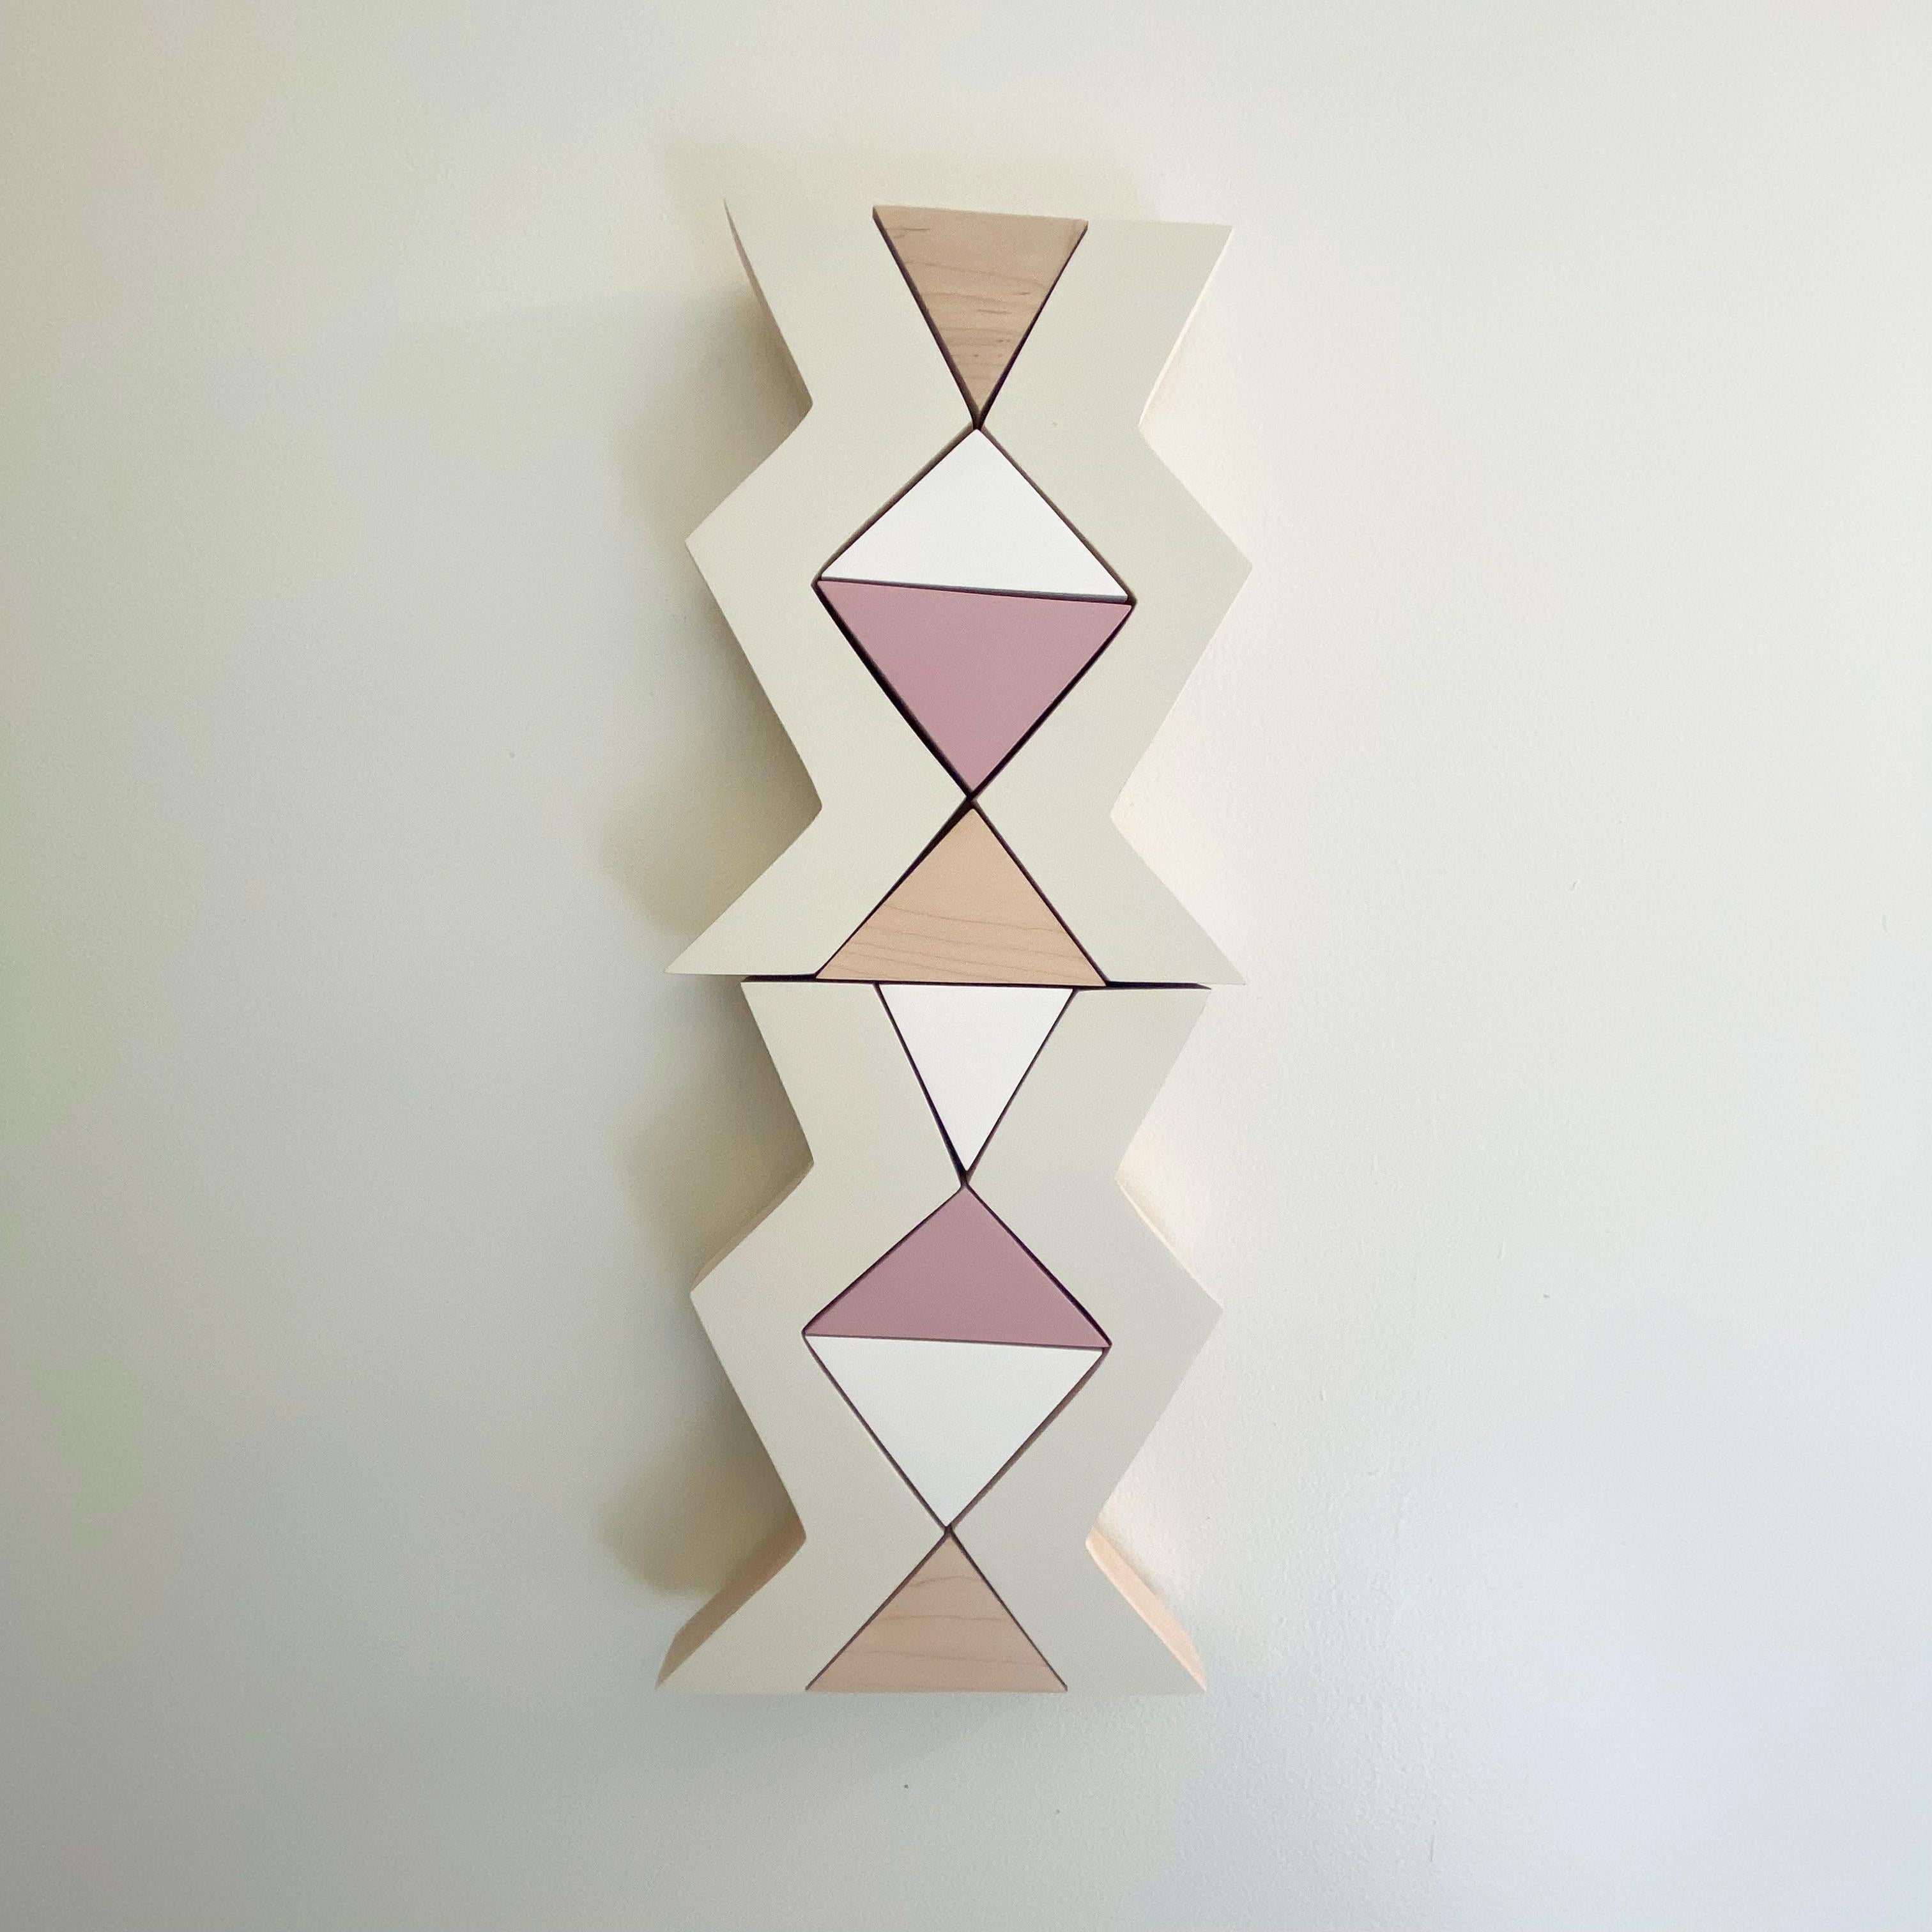 Scott Troxel Abstract Sculpture - "Dusty Pink" Wall Sculpture mid century modern, pink, tan, white, creme, boho